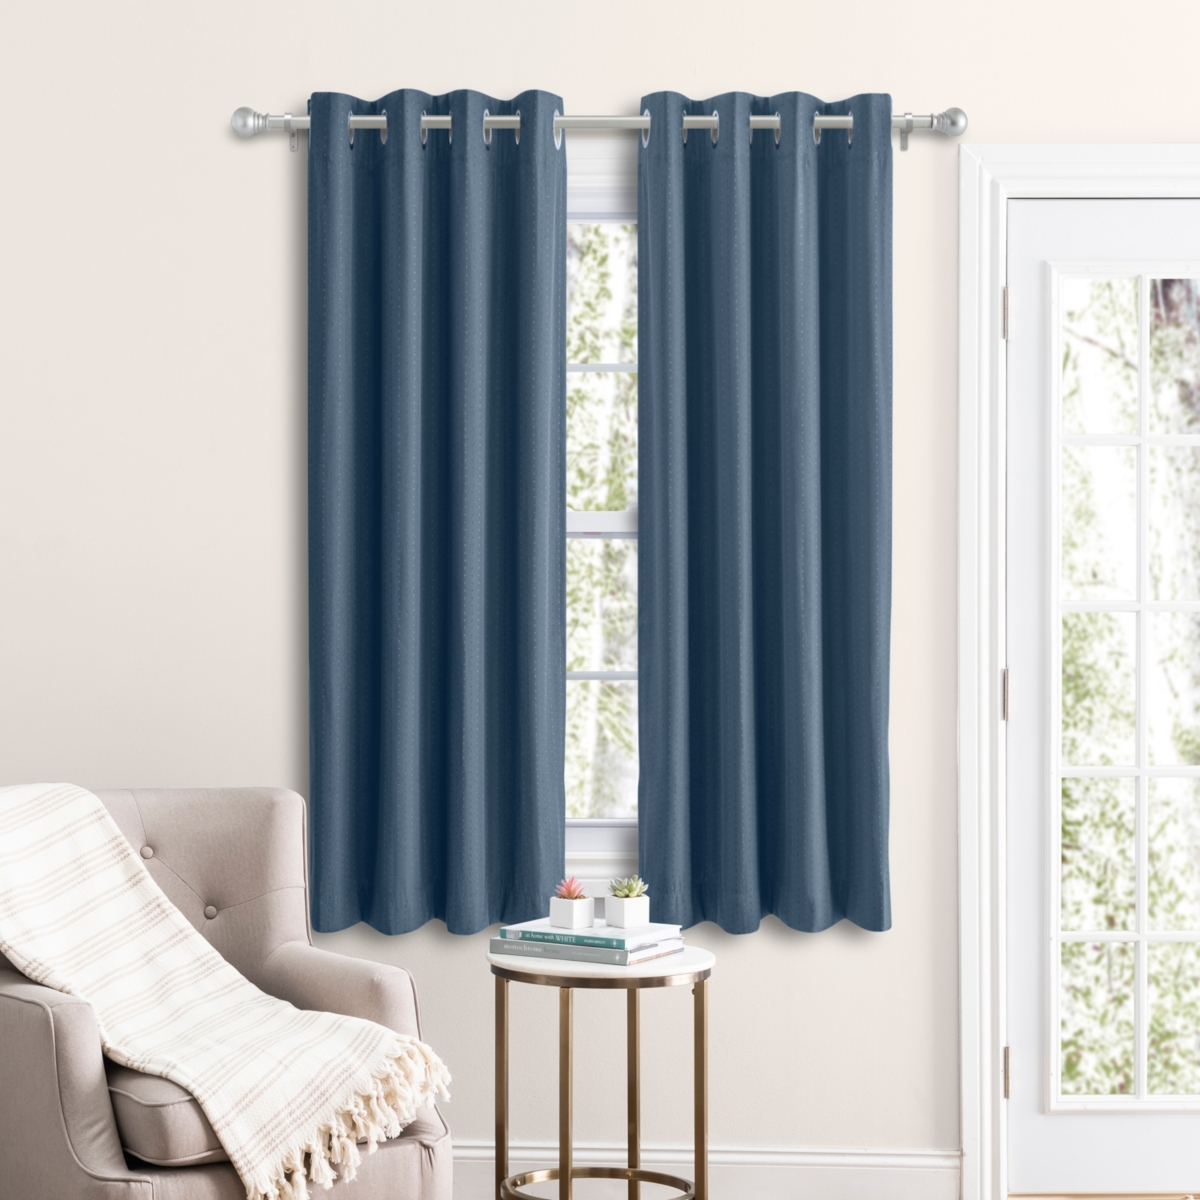 Grand Pointe Grommet Panel w/Wand Curtain 54"W x 45"L - Blue